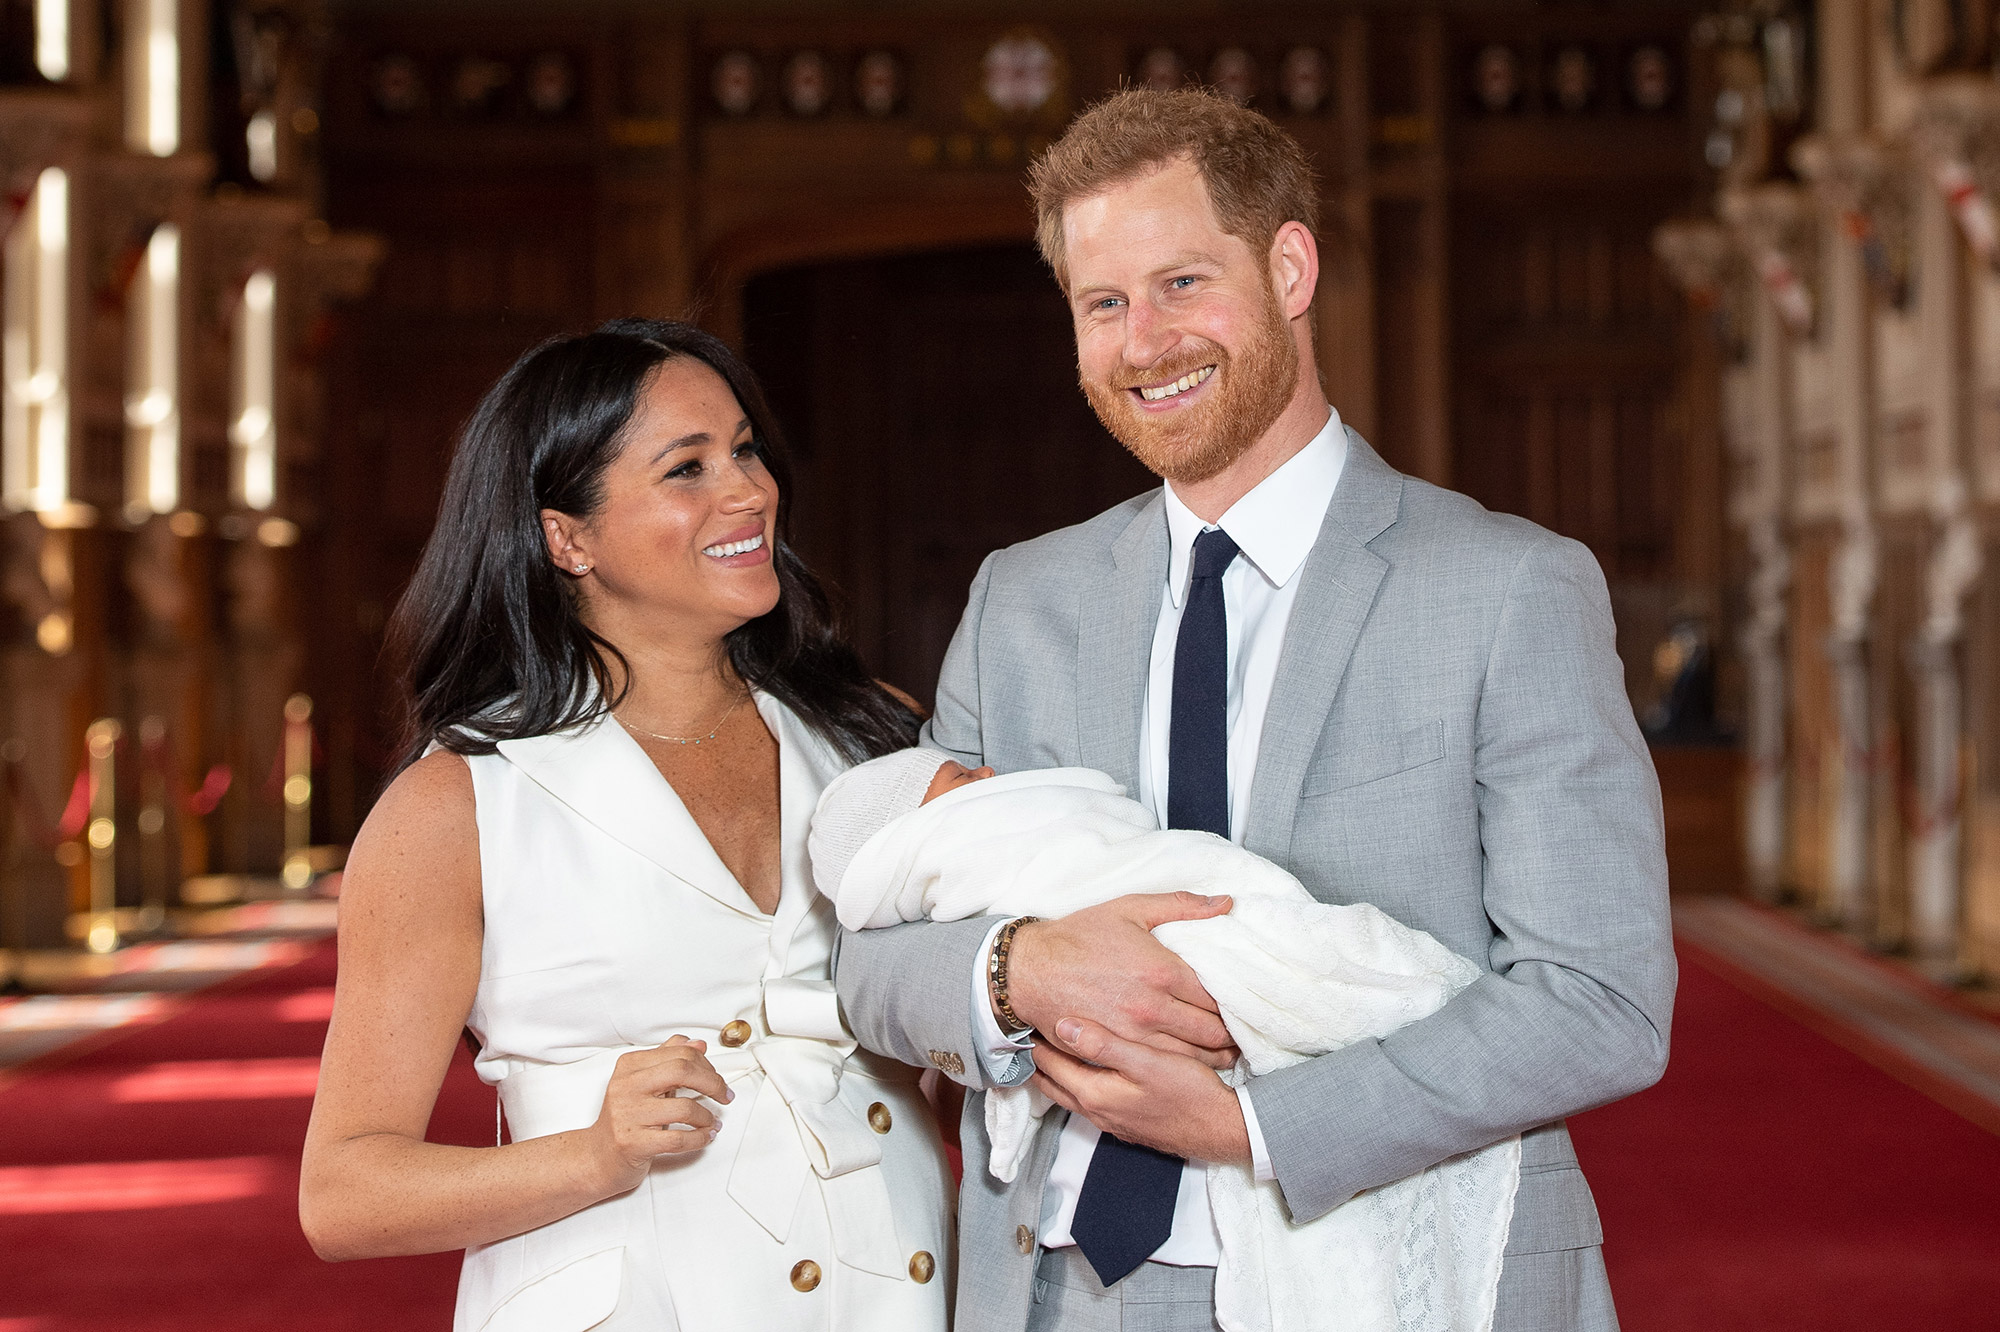 The Royals Made an Awkward Error With Archie's Christening Photos